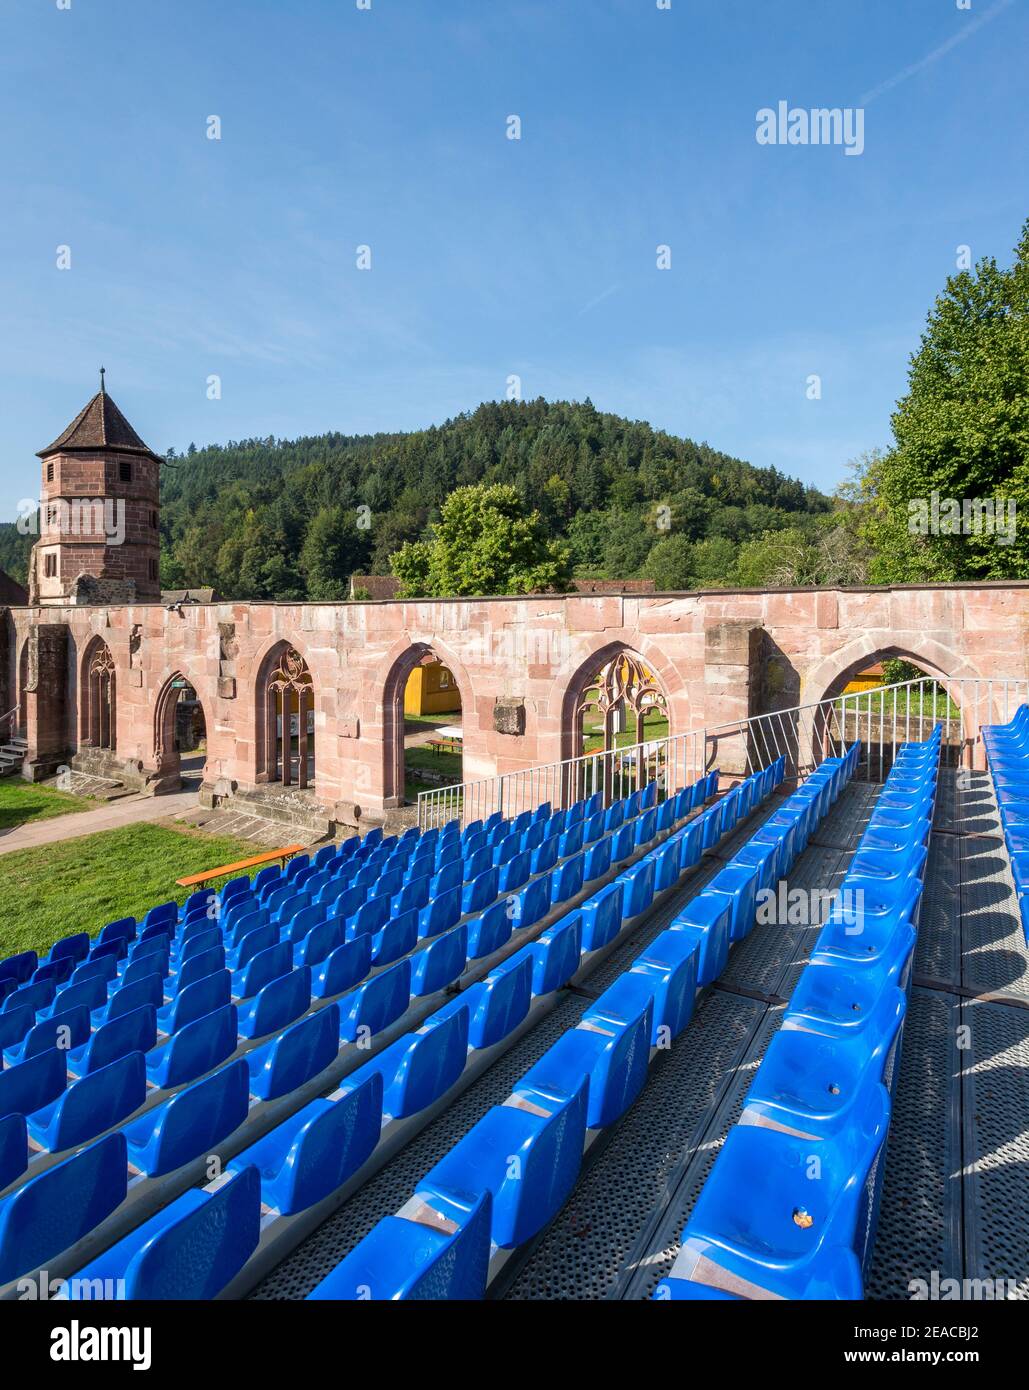 Germany, Baden-Wuerttemberg, Calw-Hirsau, Hirsau monastery, auditorium, open-air theater, Calwer monastery summer, blue seating, gate tower of the former hunting lodge. Stock Photo